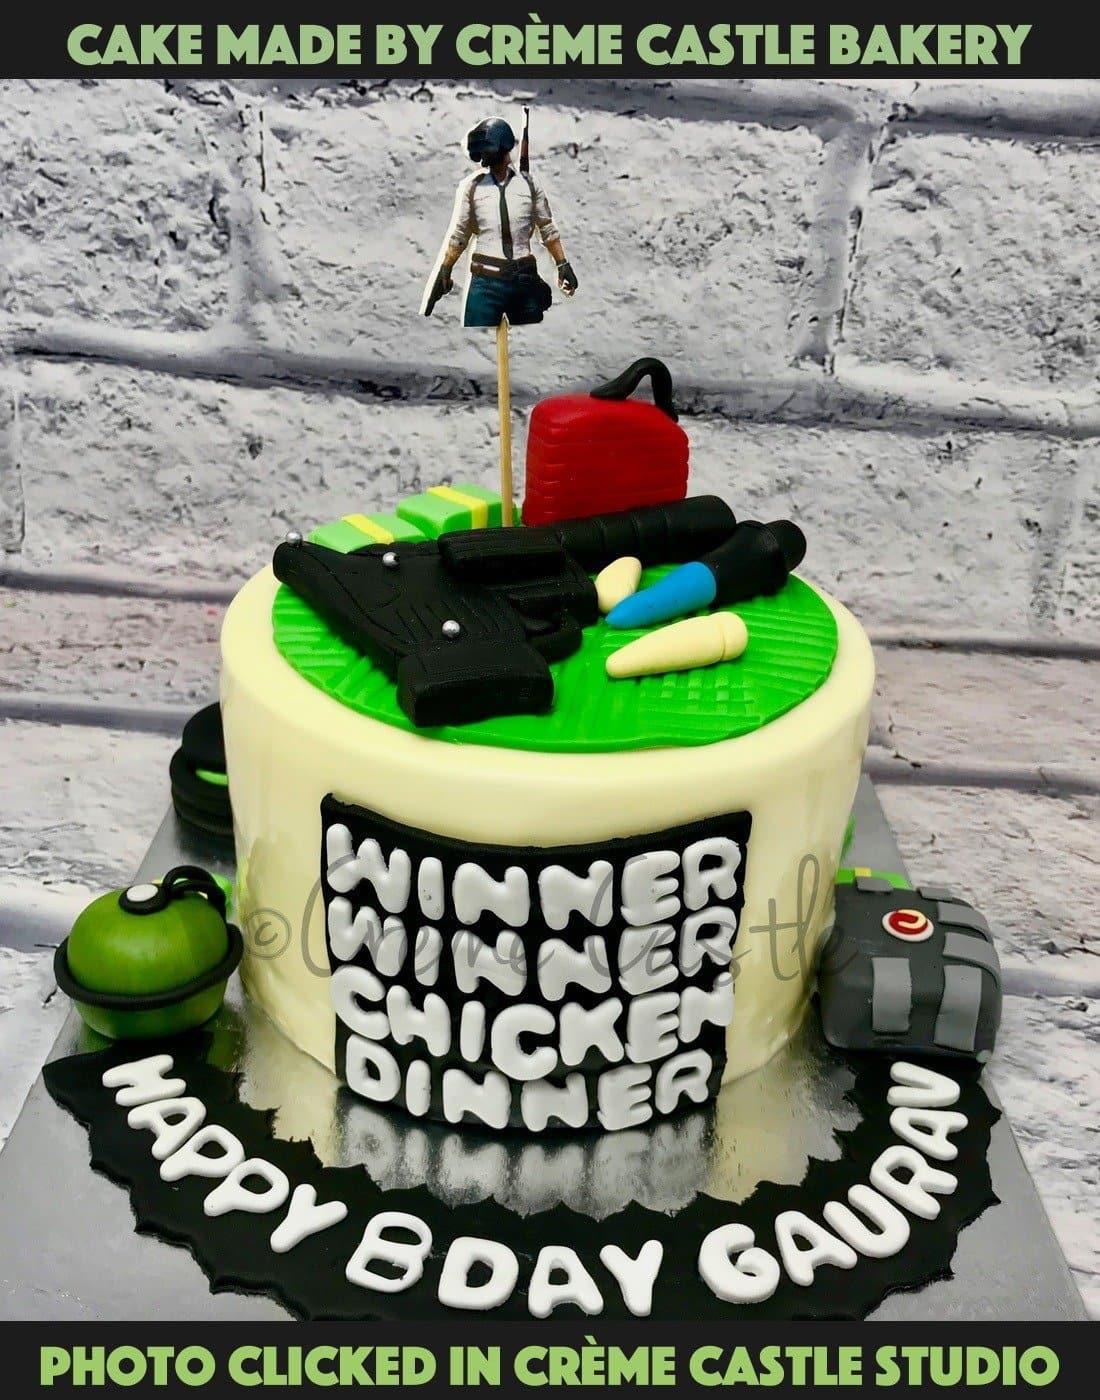 Best Totally Free pubg cake Thoughts, #Cake #Free #pubg #Thoughts #Totally  | Cake designs for boy, Cake, Birthday cake for him